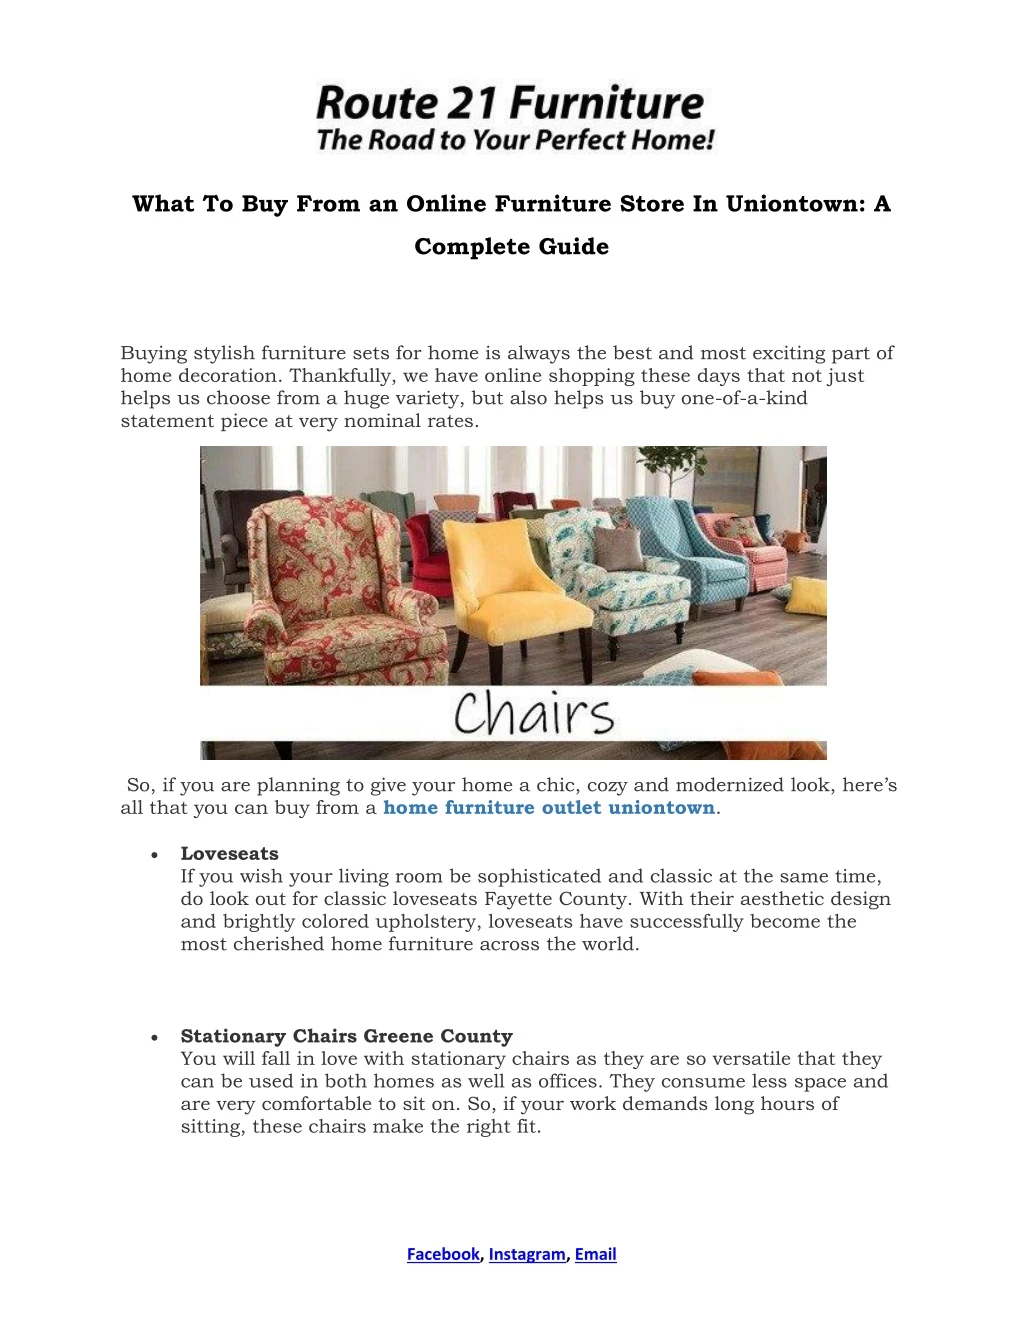 what to buy from an online furniture store